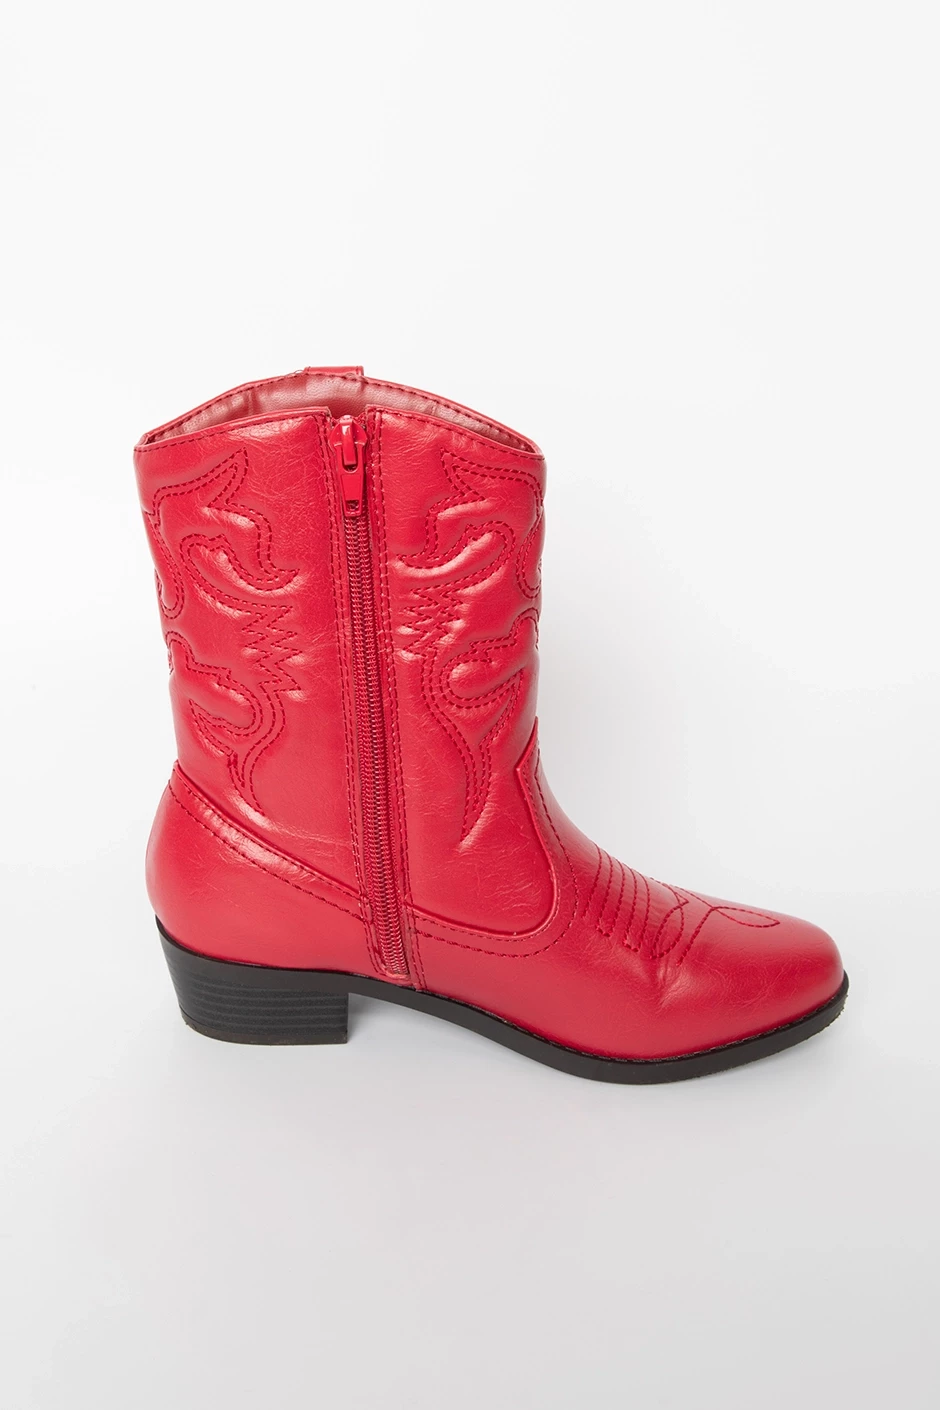 https://c211747605cdf5d8cd74-f50fbe37b046904c7c00bee626e99452.ssl.cf2.rackcdn.com/images/products/kids_country_charm_boots_red_5_1682535789_lg.webp